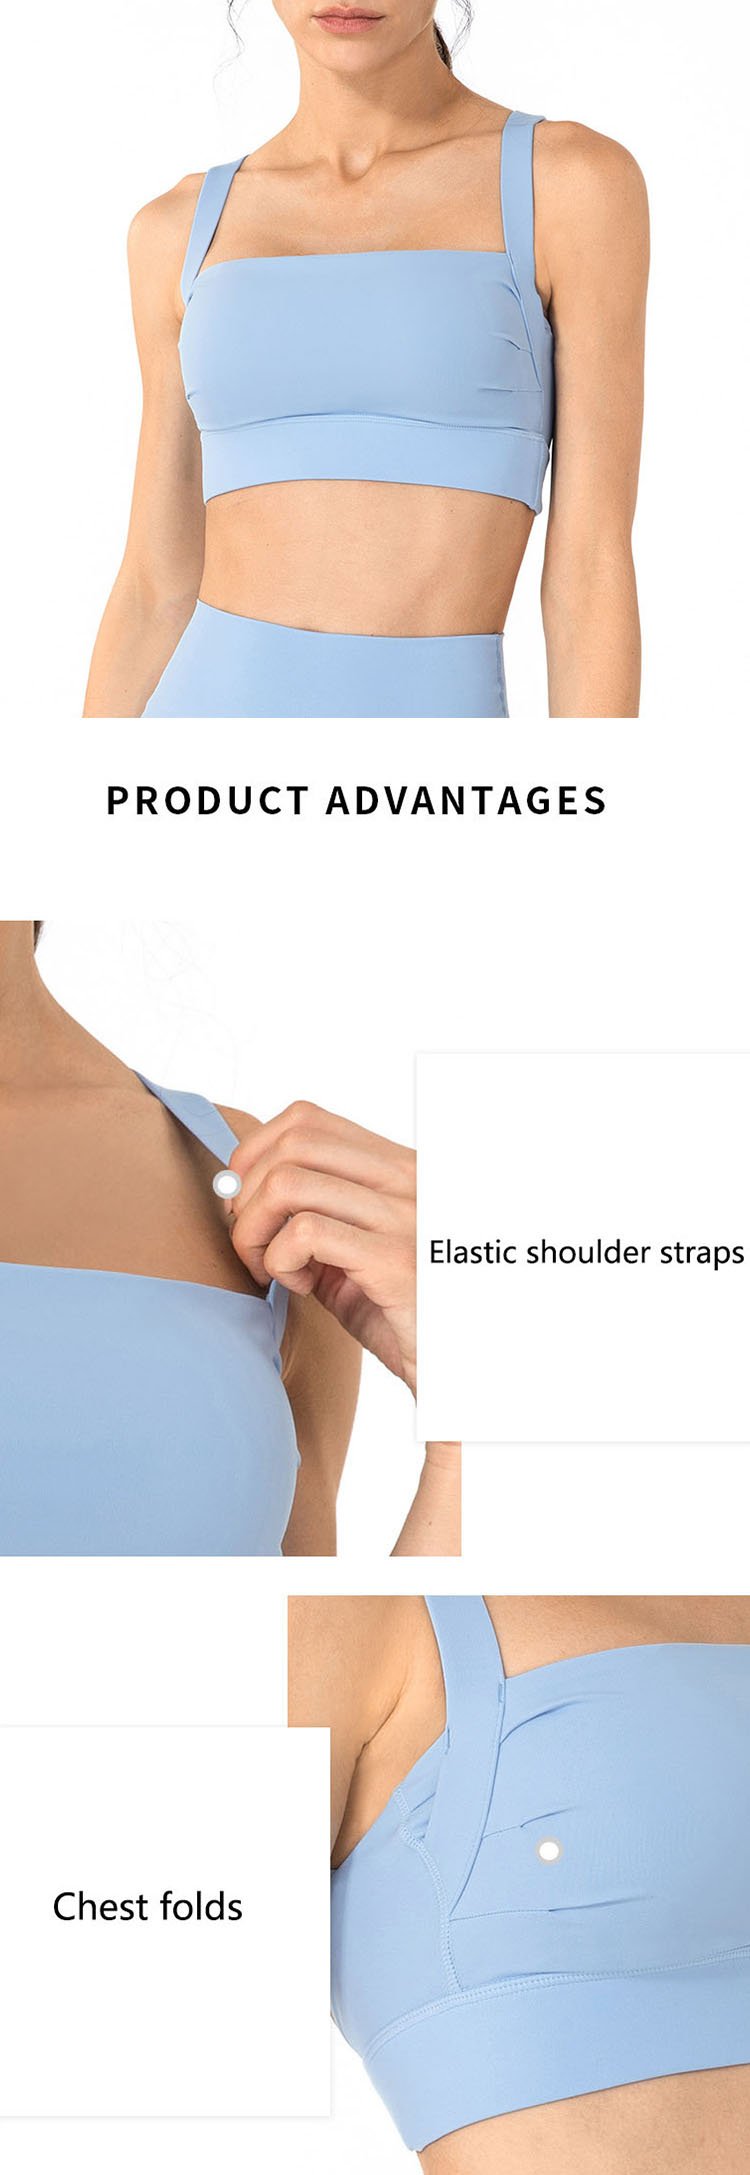 The front design of sports bra not racerback is so intuitive that we often forget the back design